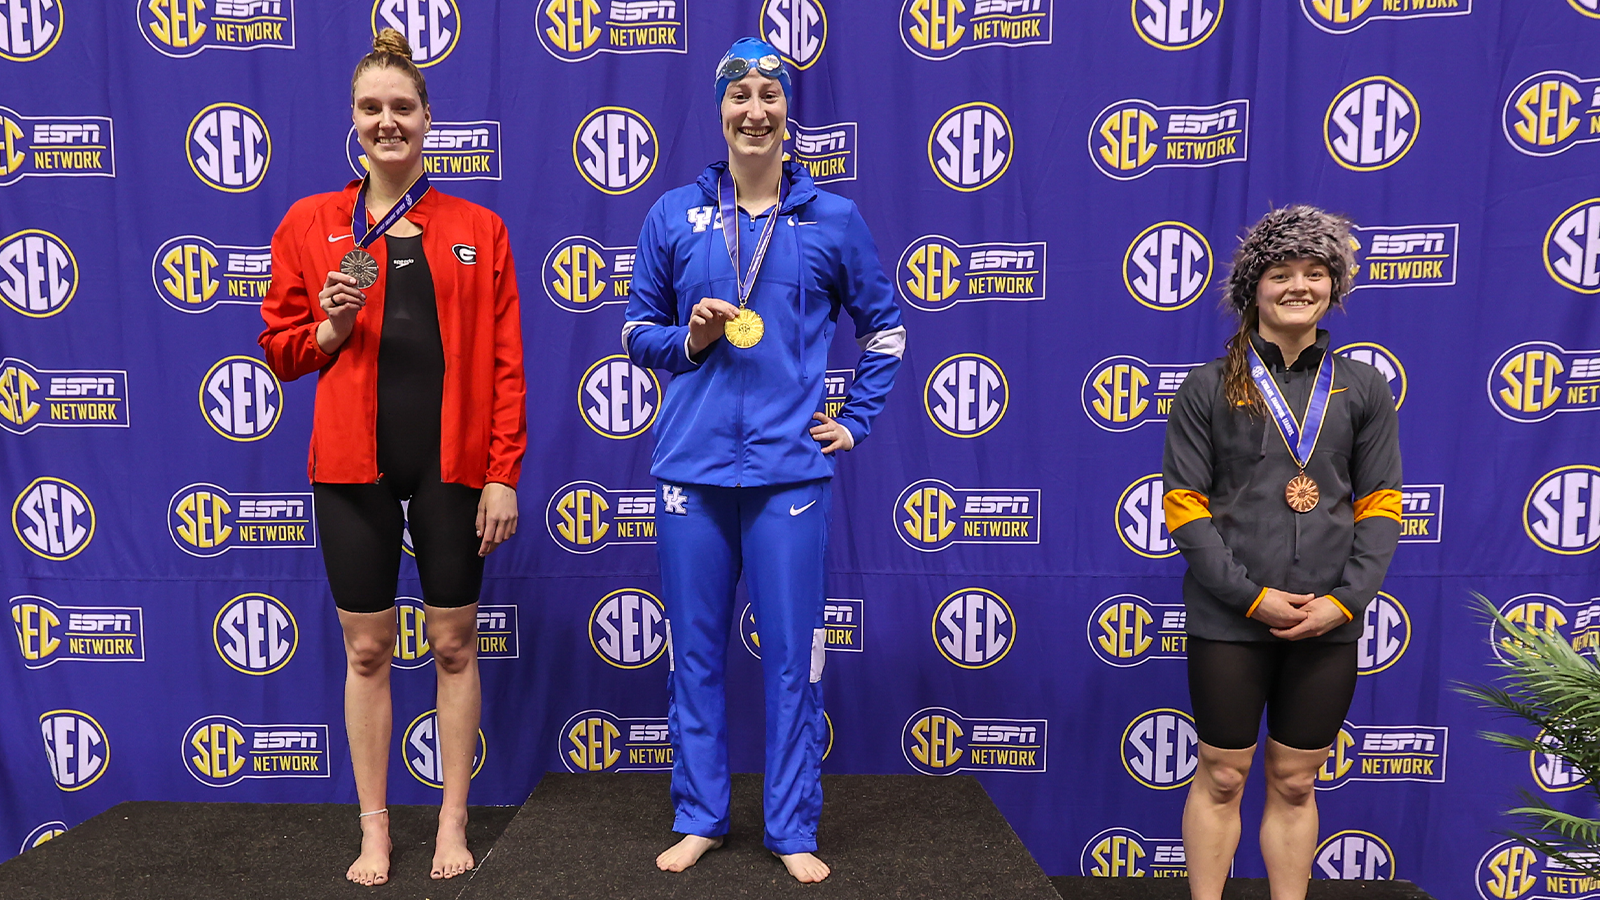 Davey Wins 200 Breast, Three Other Wildcats Medal on Final Night of SEC Championships